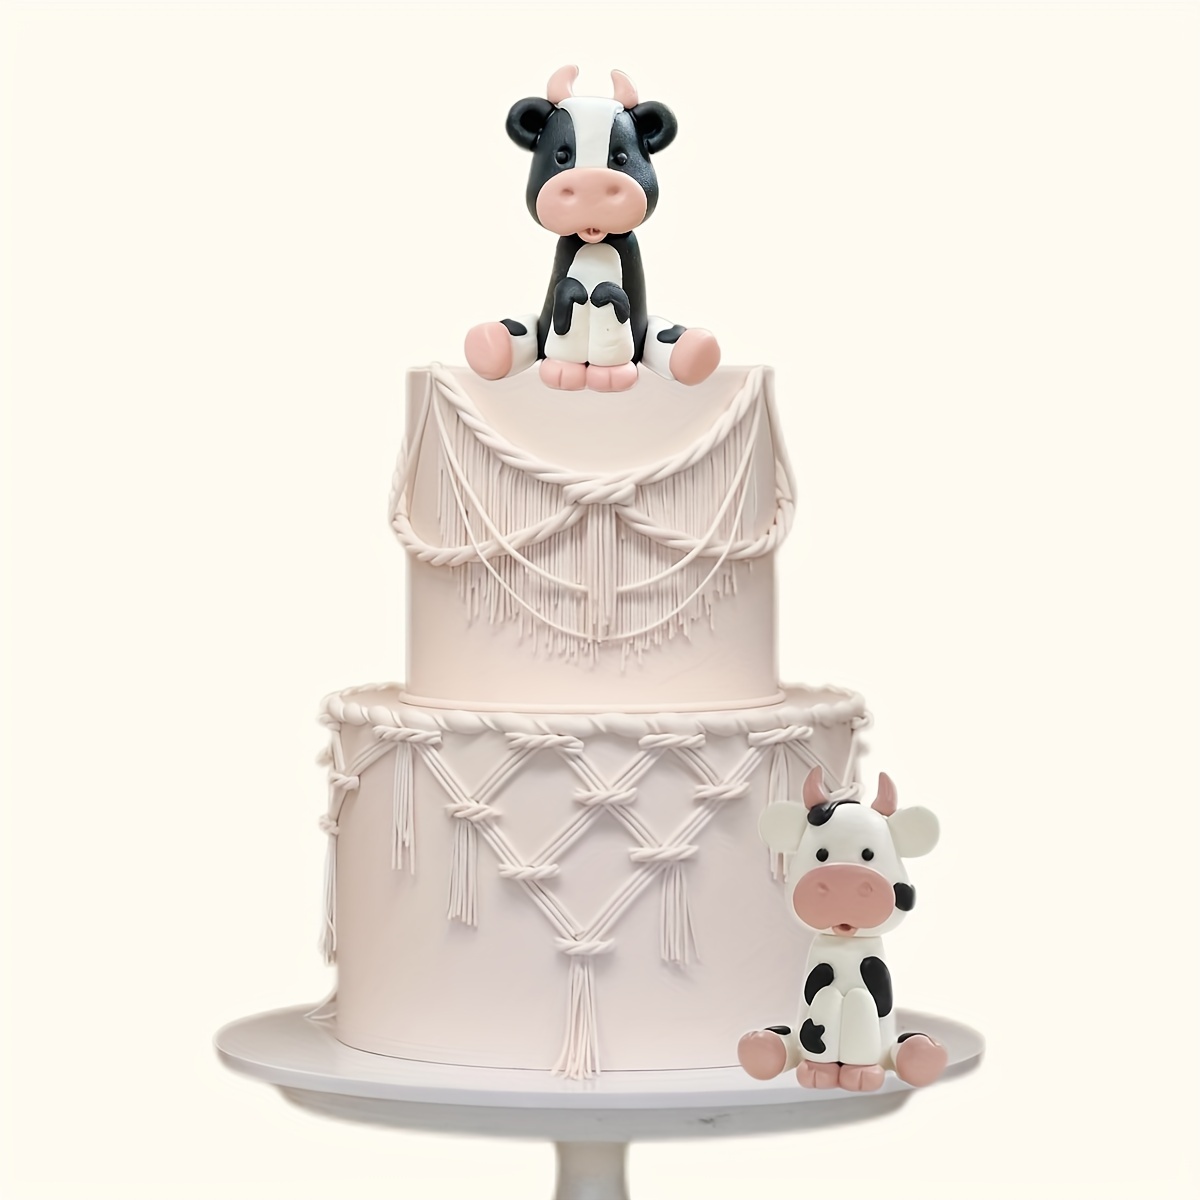 

Farm Cow Cake Toppers Set Of 2 - Resin Cow Figurines For Birthday, Baby Shower, Baptism, Gender Reveal Party Supplies - No Electricity, Featherless Farm Animal Cake Decorations